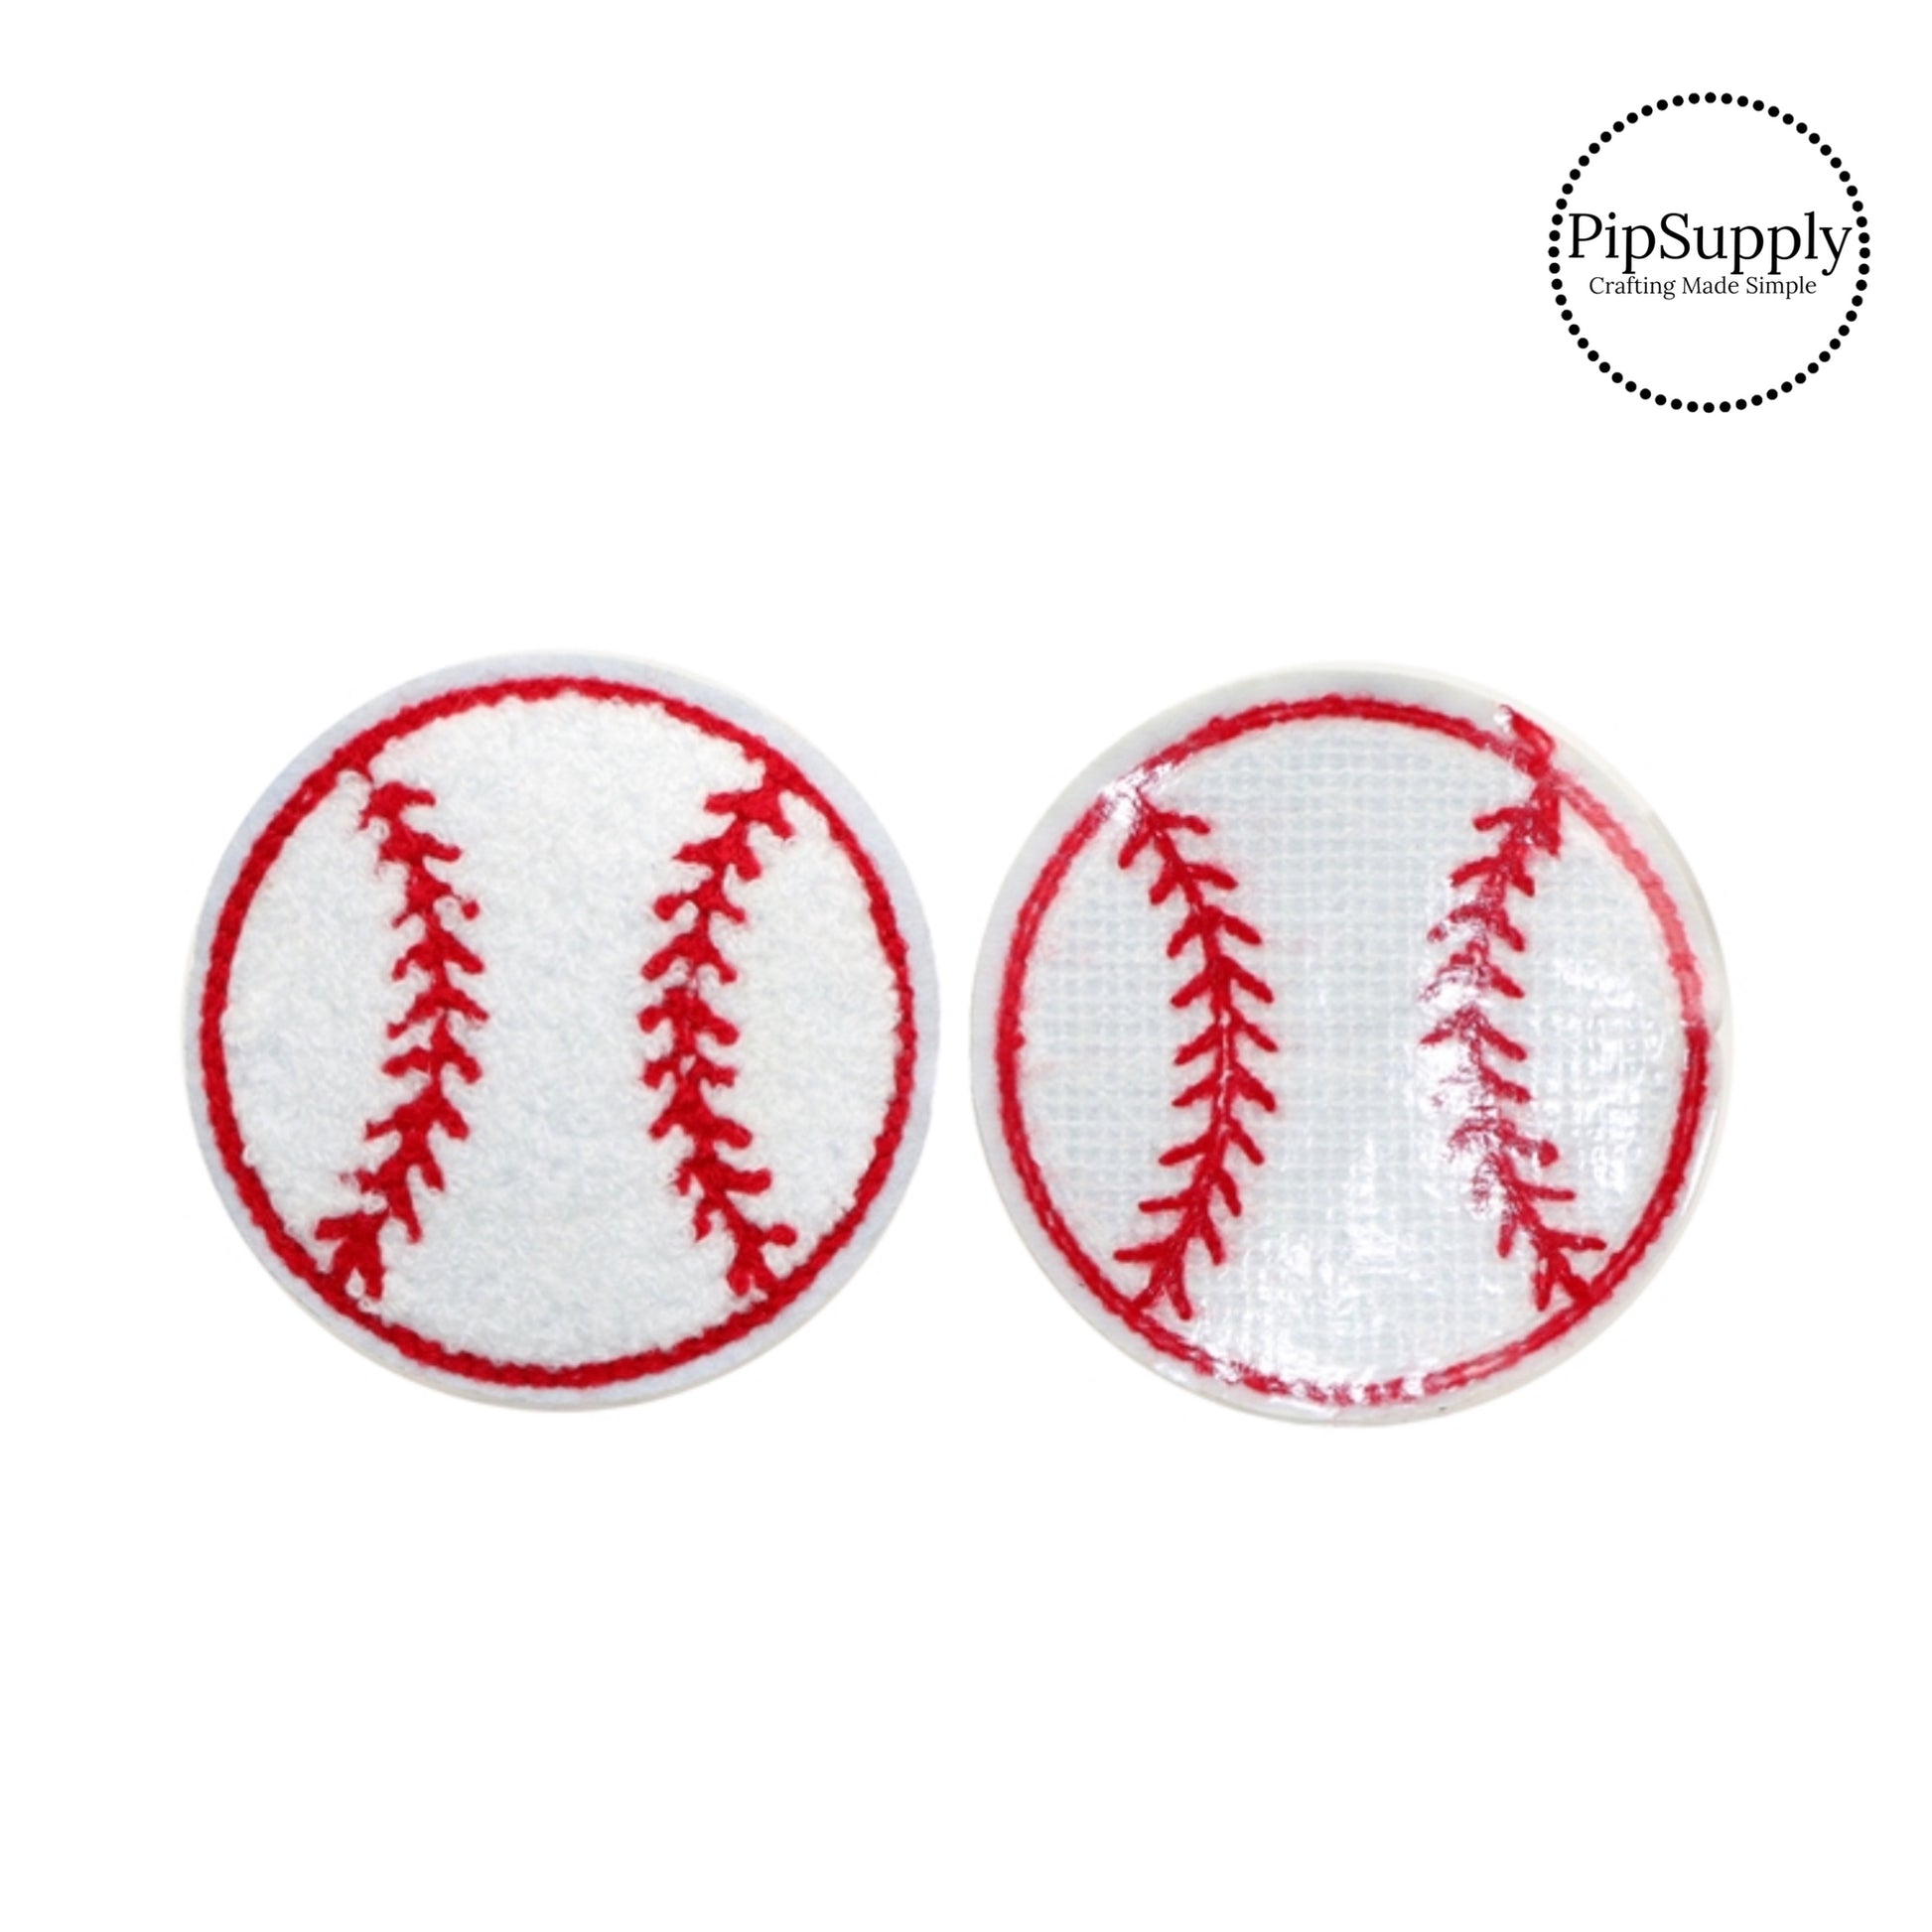 Large Red and White Baseball Chenille Iron on heat transfer patch.